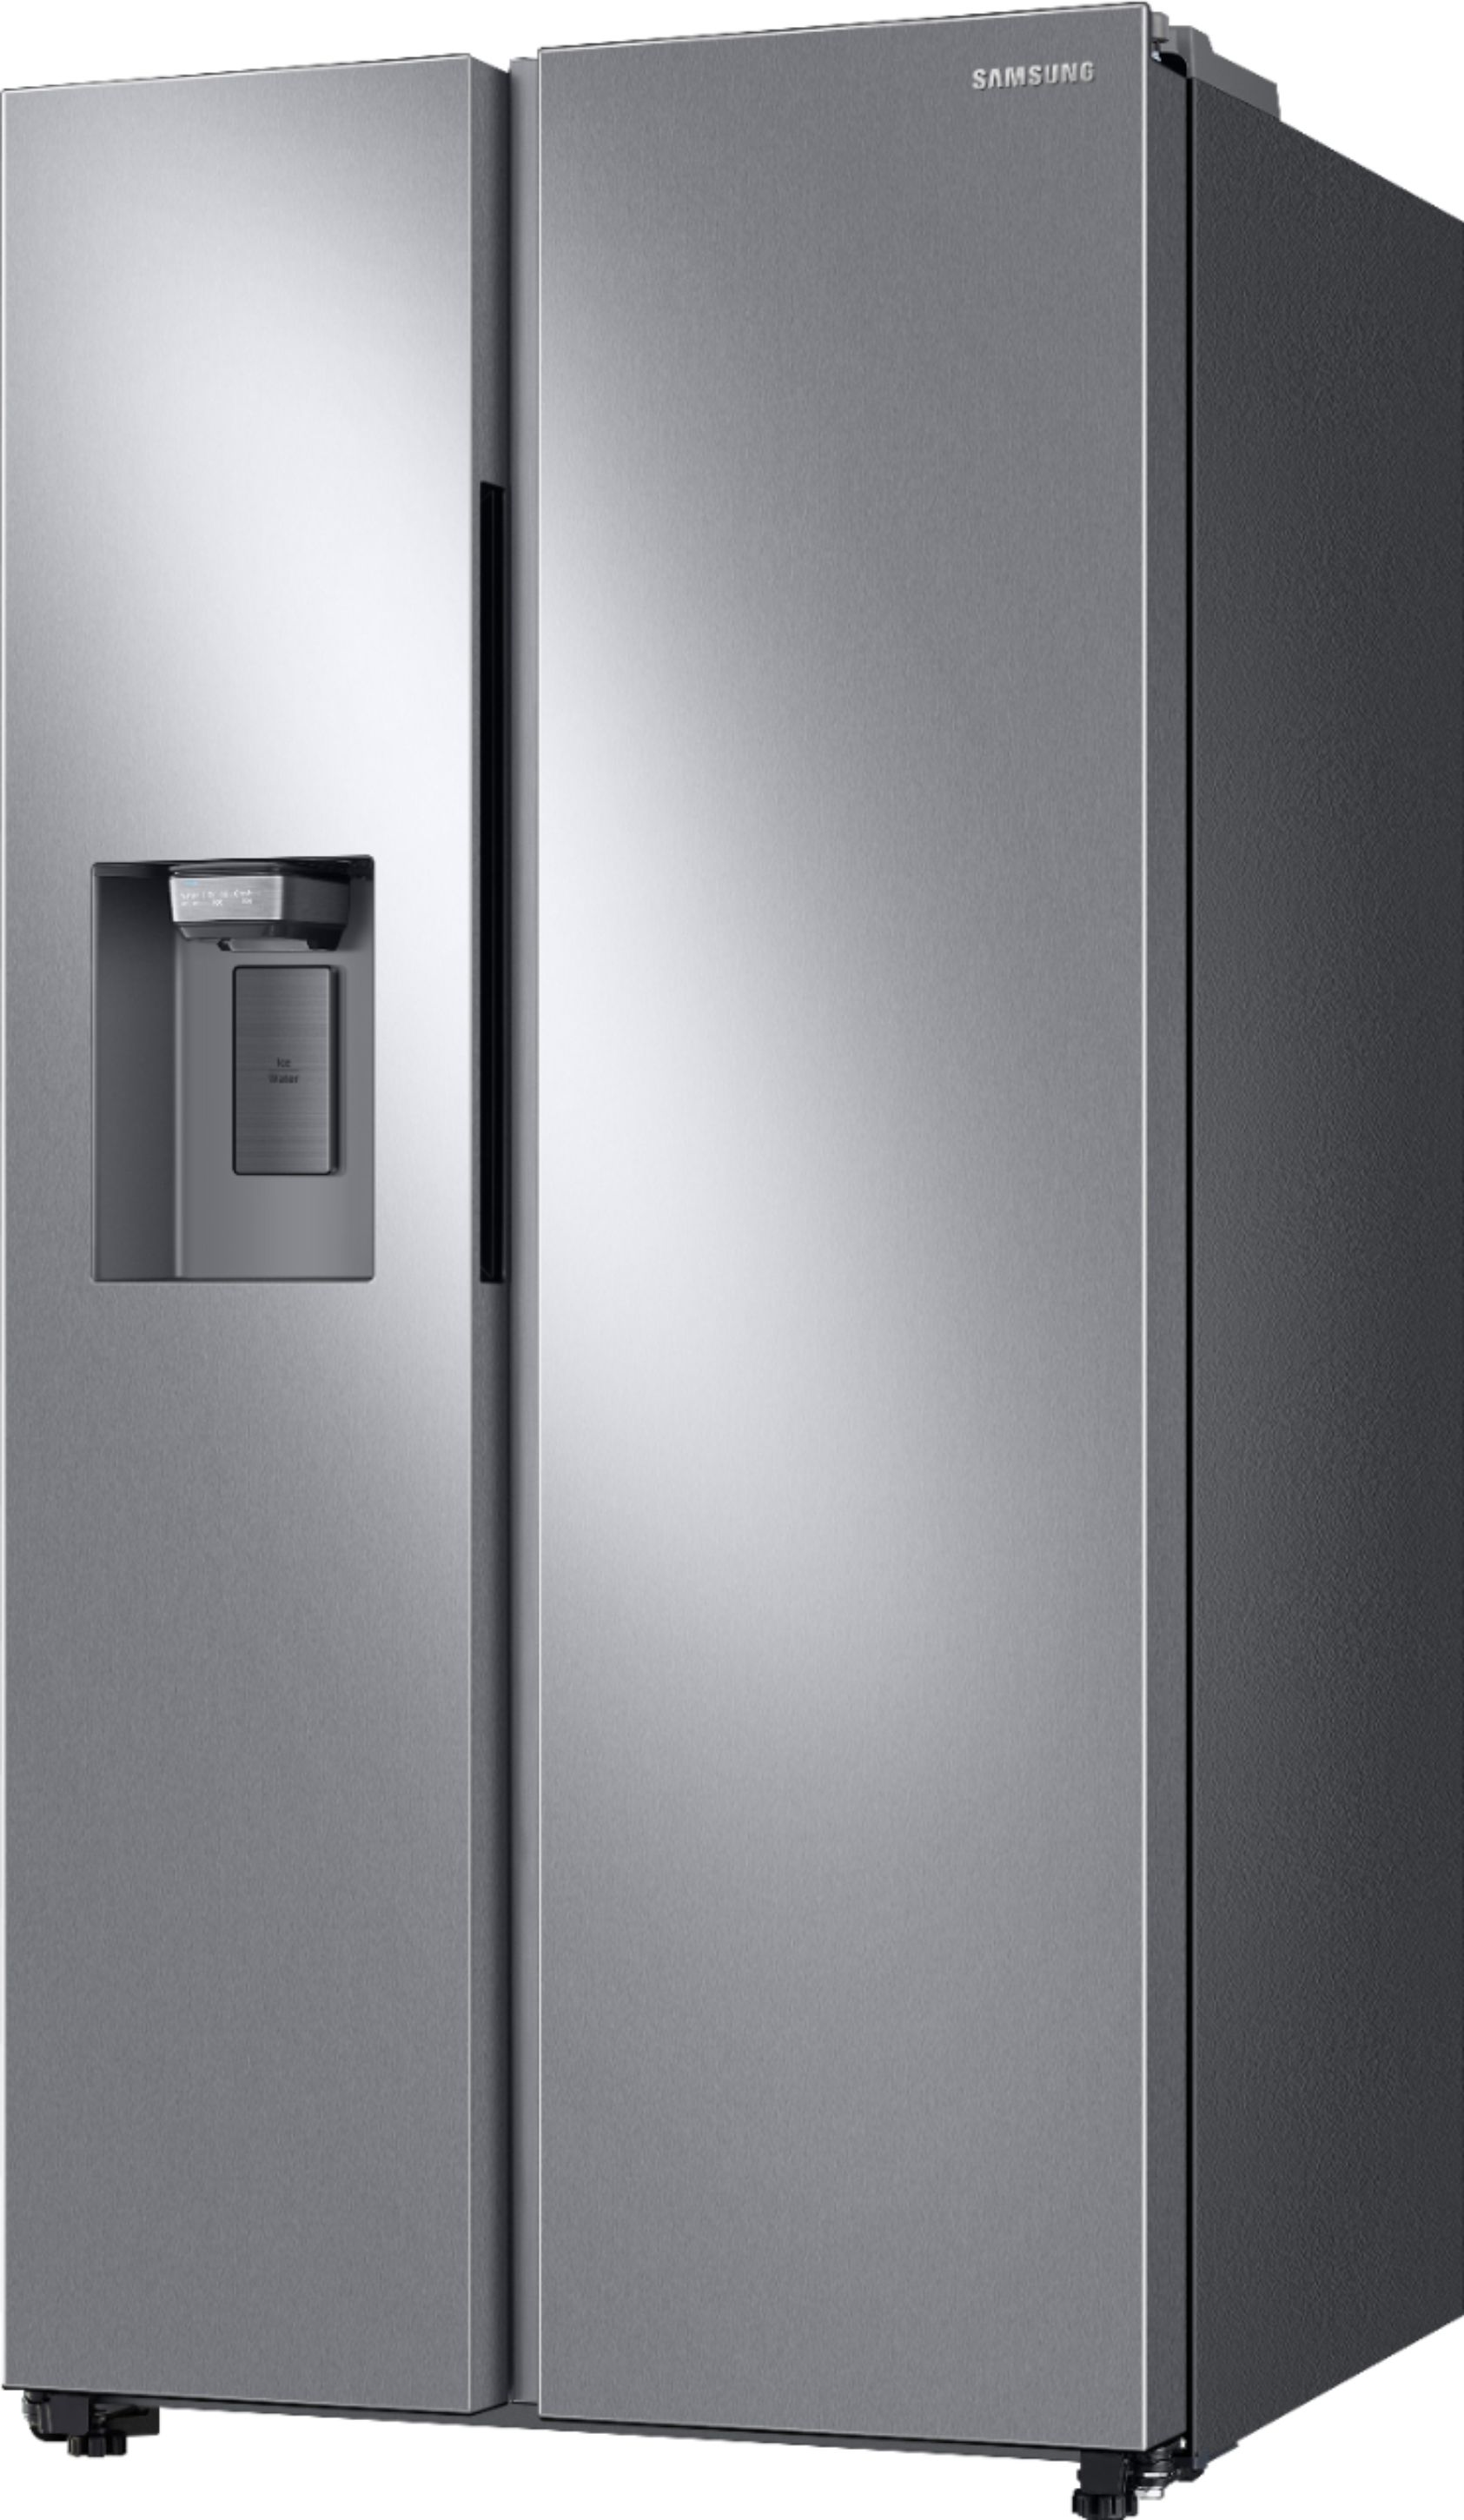 Left View: Samsung - 27.4 cu. ft. Side-by-Side Refrigerator with Large Capacity - Stainless Steel